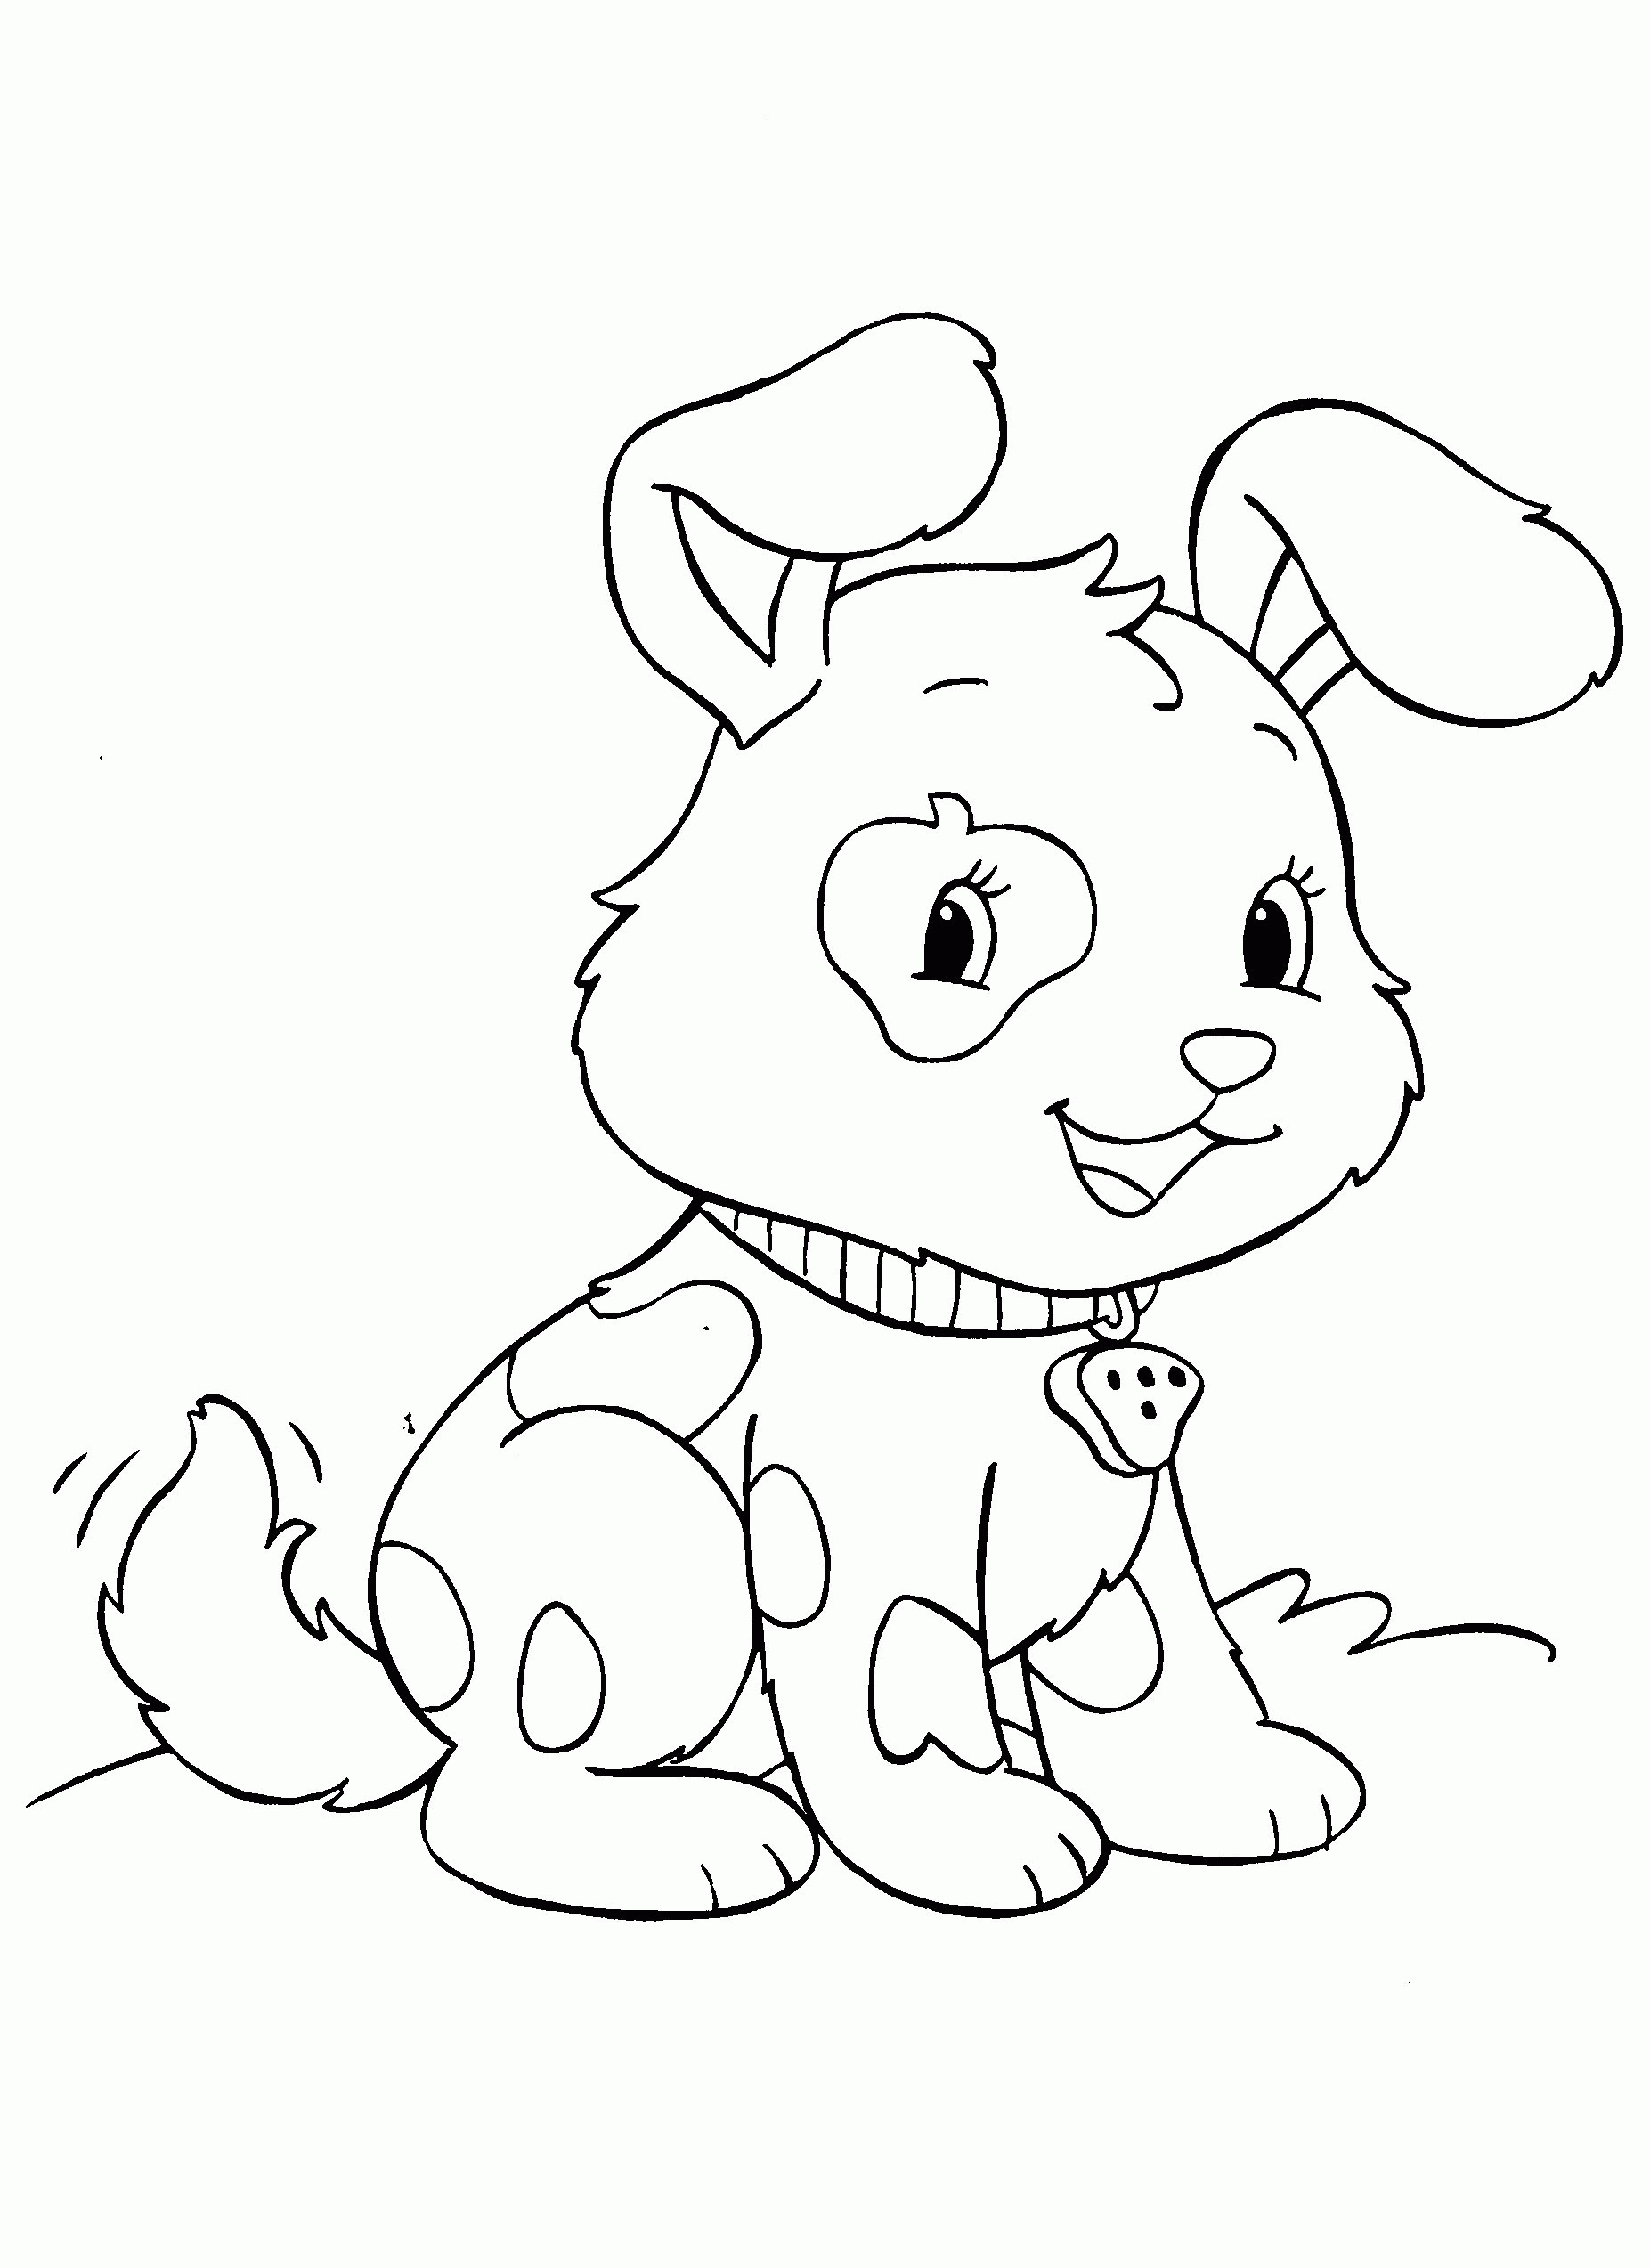 Coloring Pages Of Cute Baby Puppies Coloring Pages Of Cute Dogs